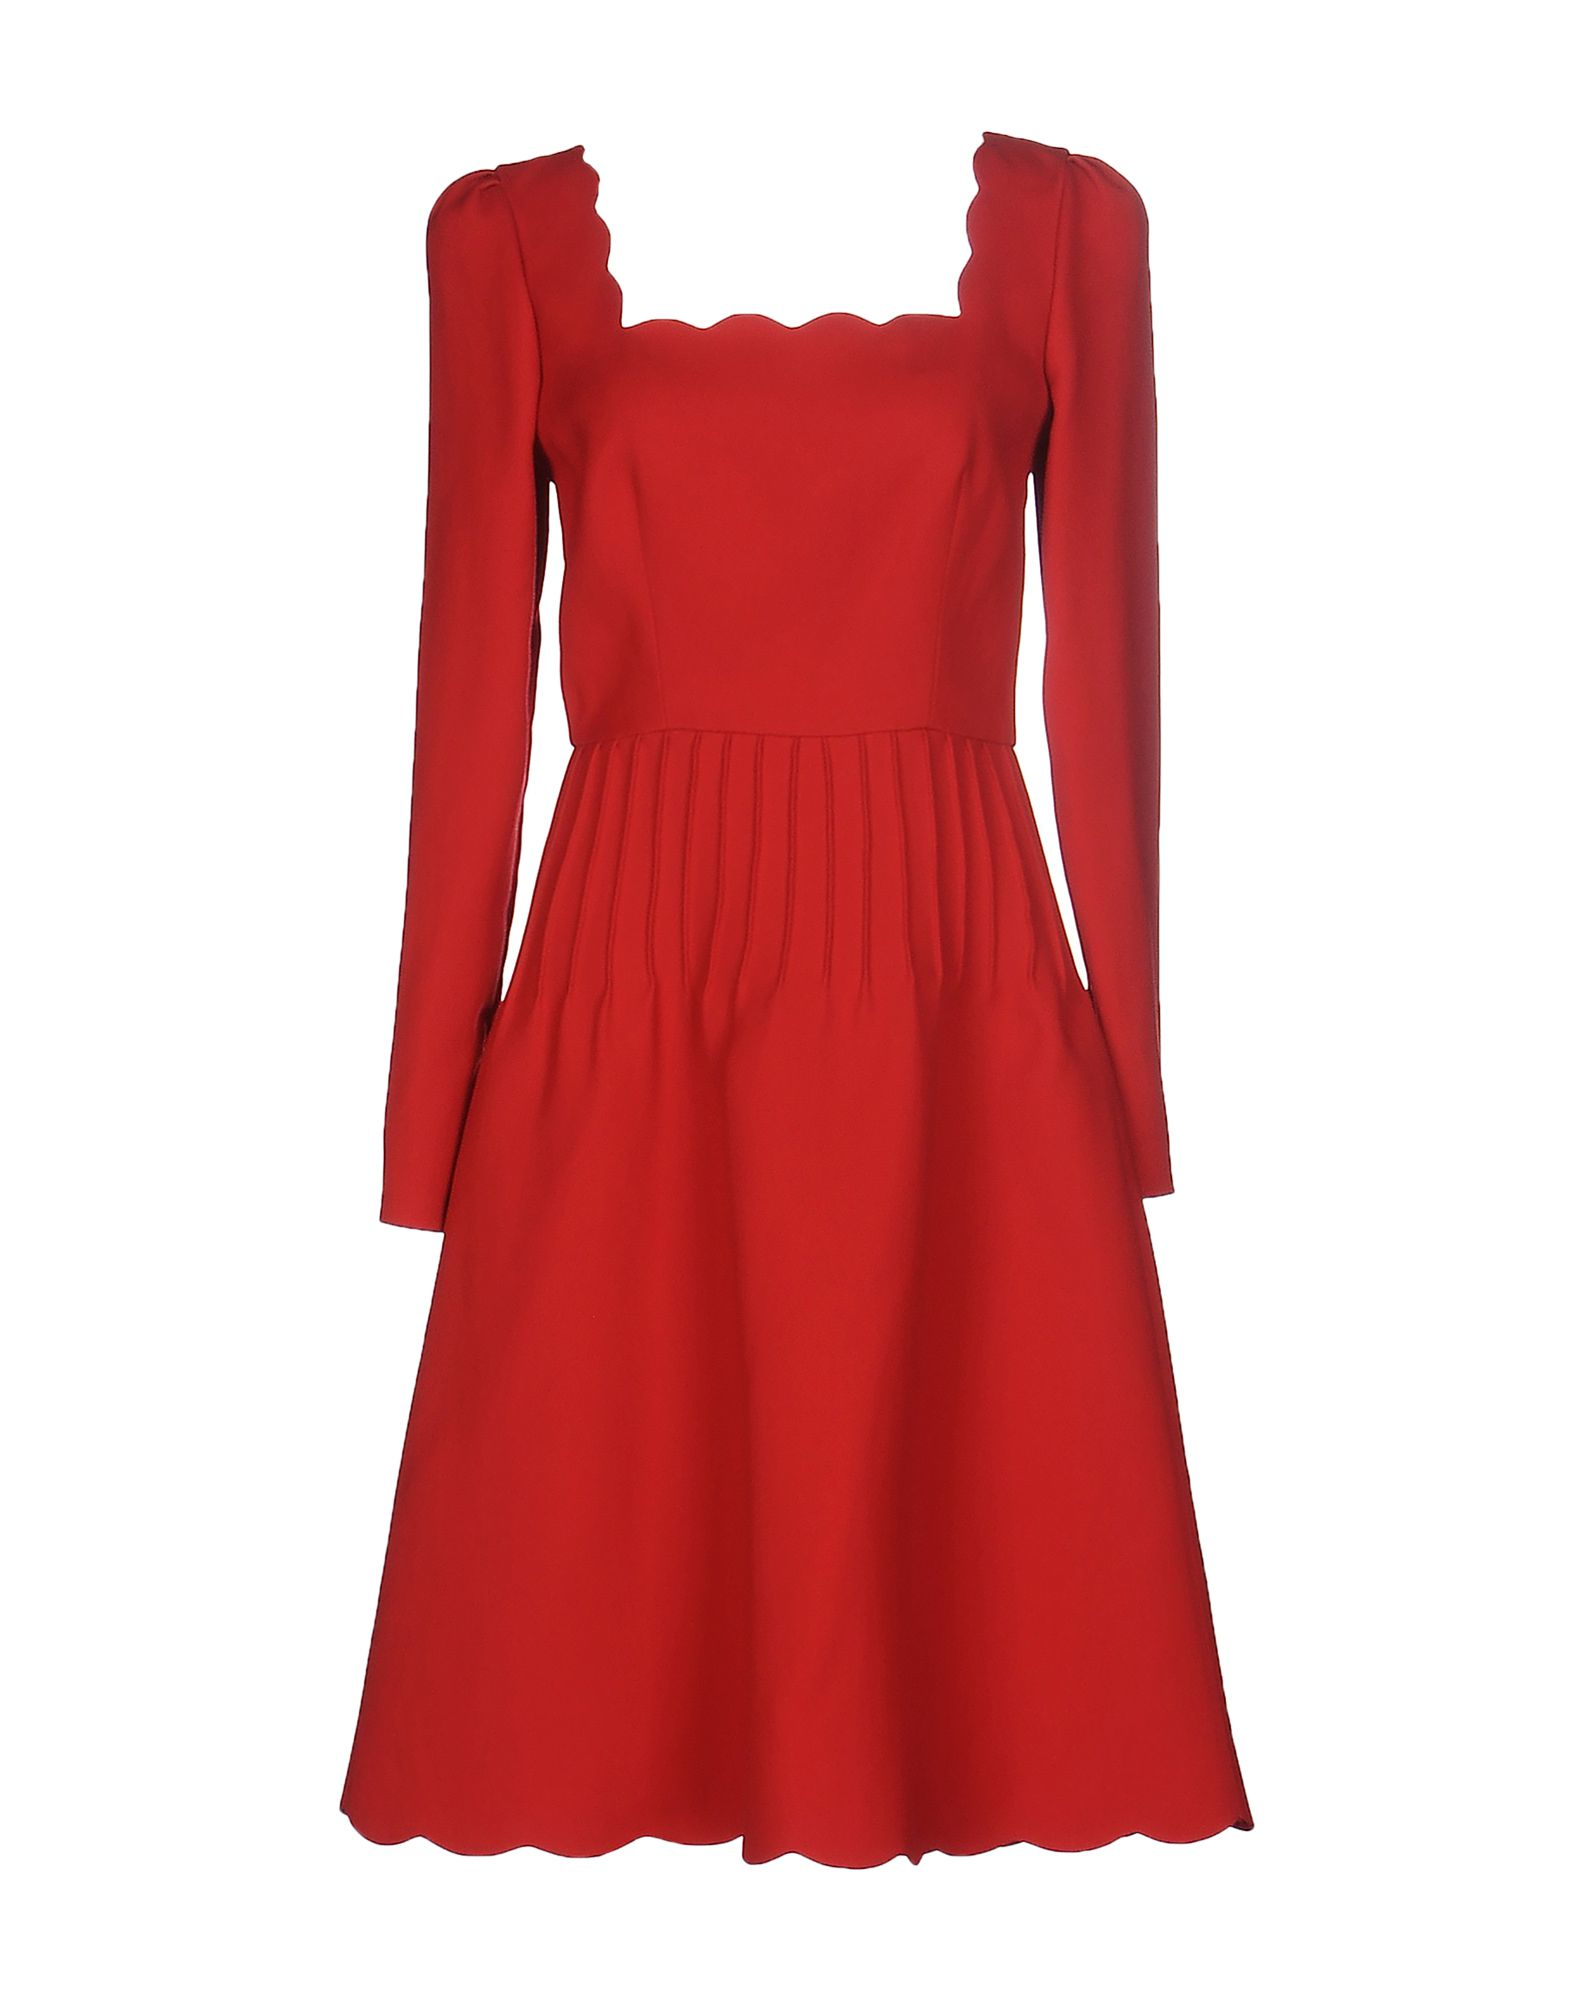 Lyst - Valentino Knee-length Dress in Red